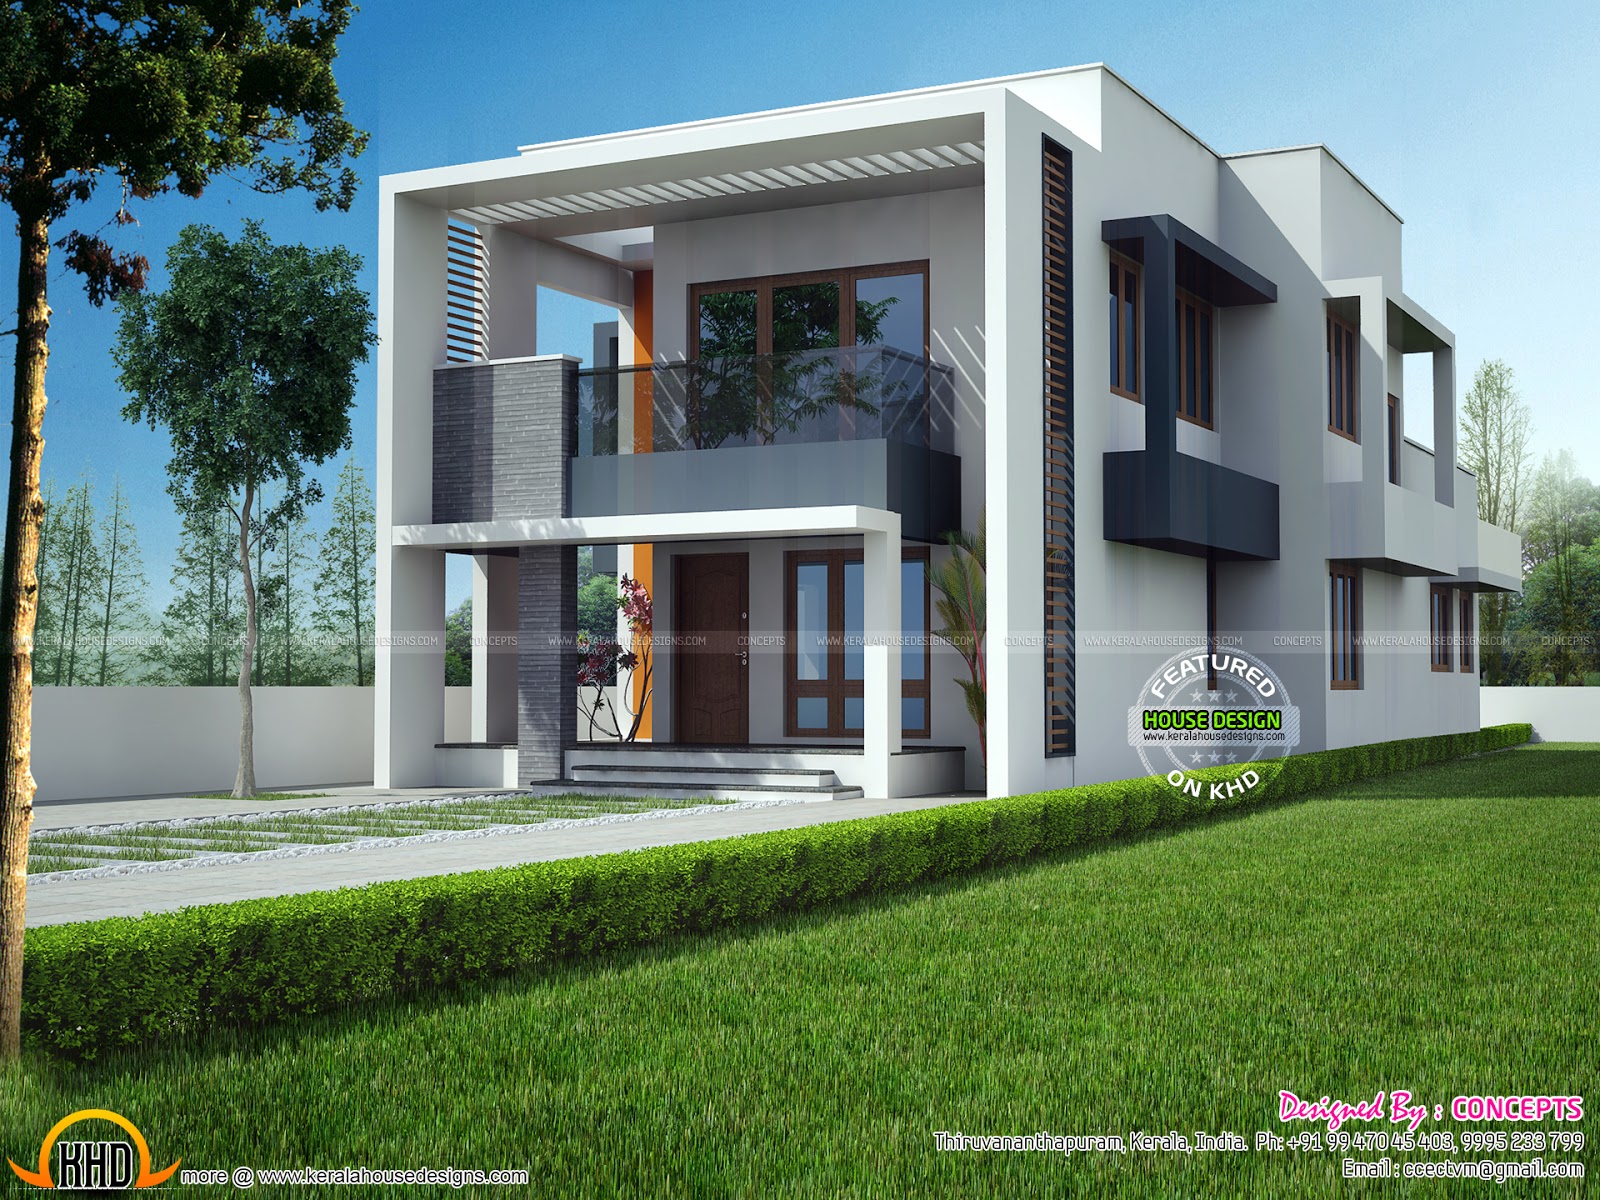 Floor plan available of this 2000 sq ft home Kerala home 